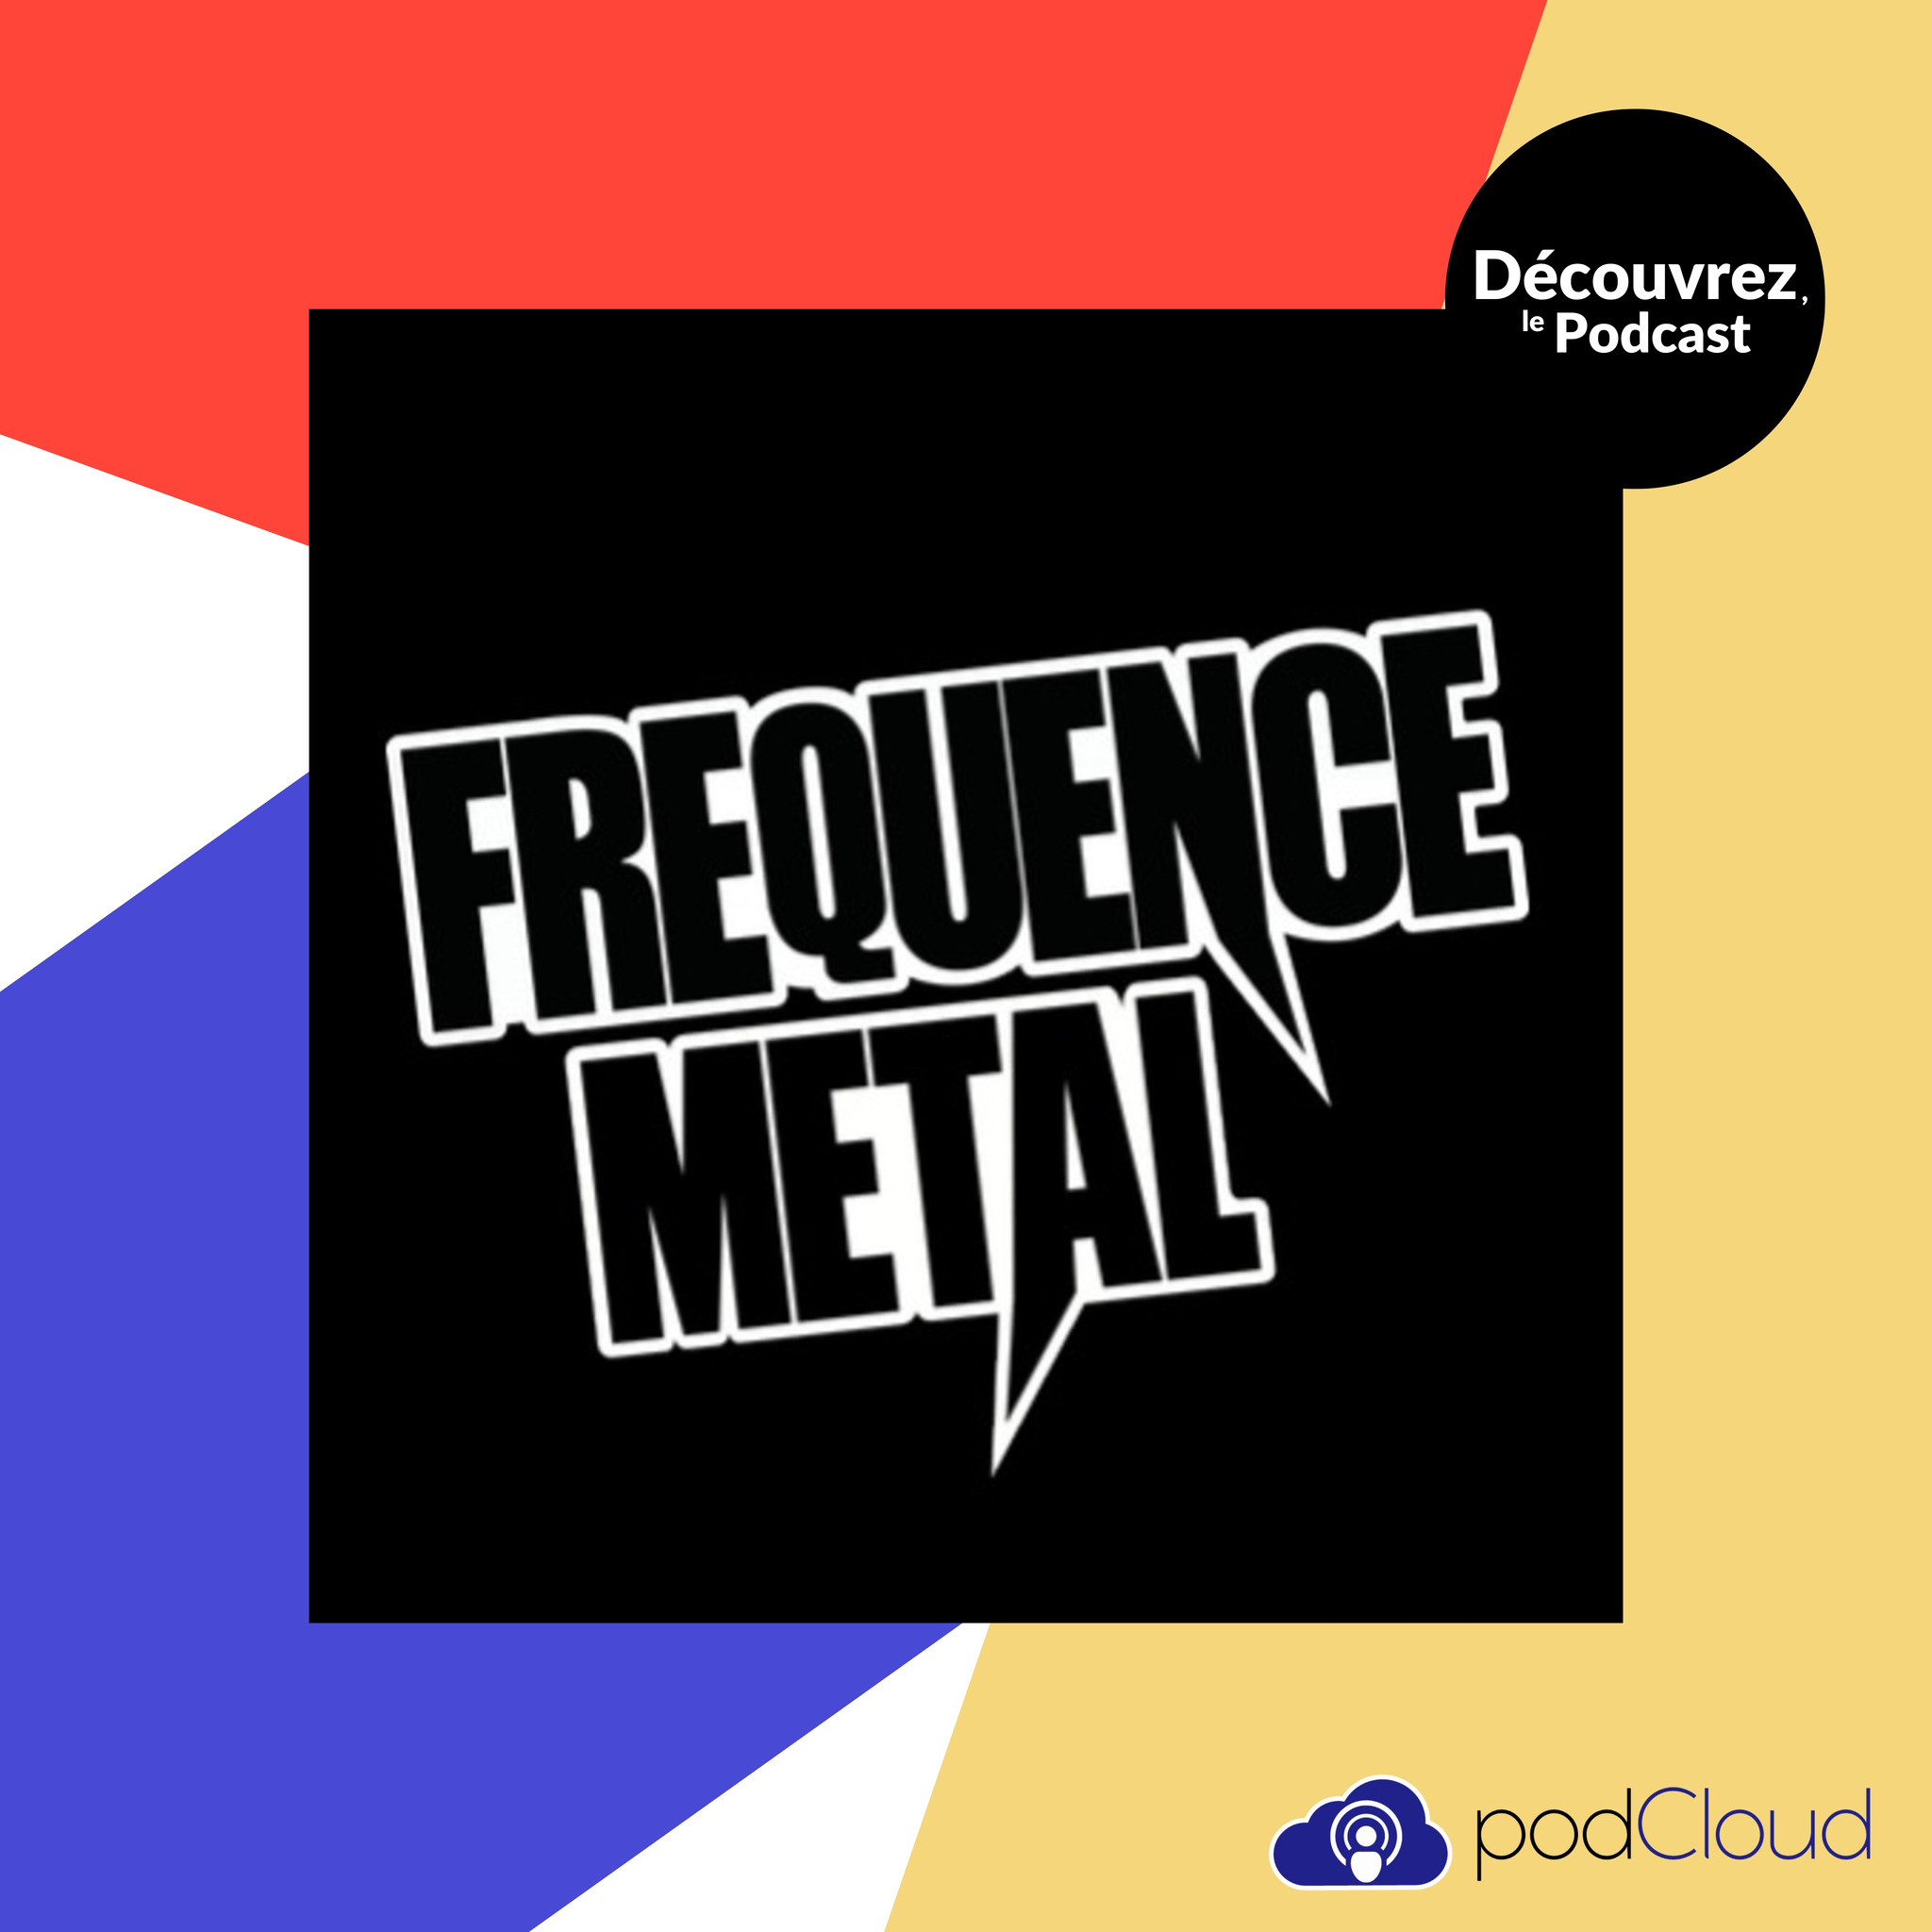 Fréquence Metal